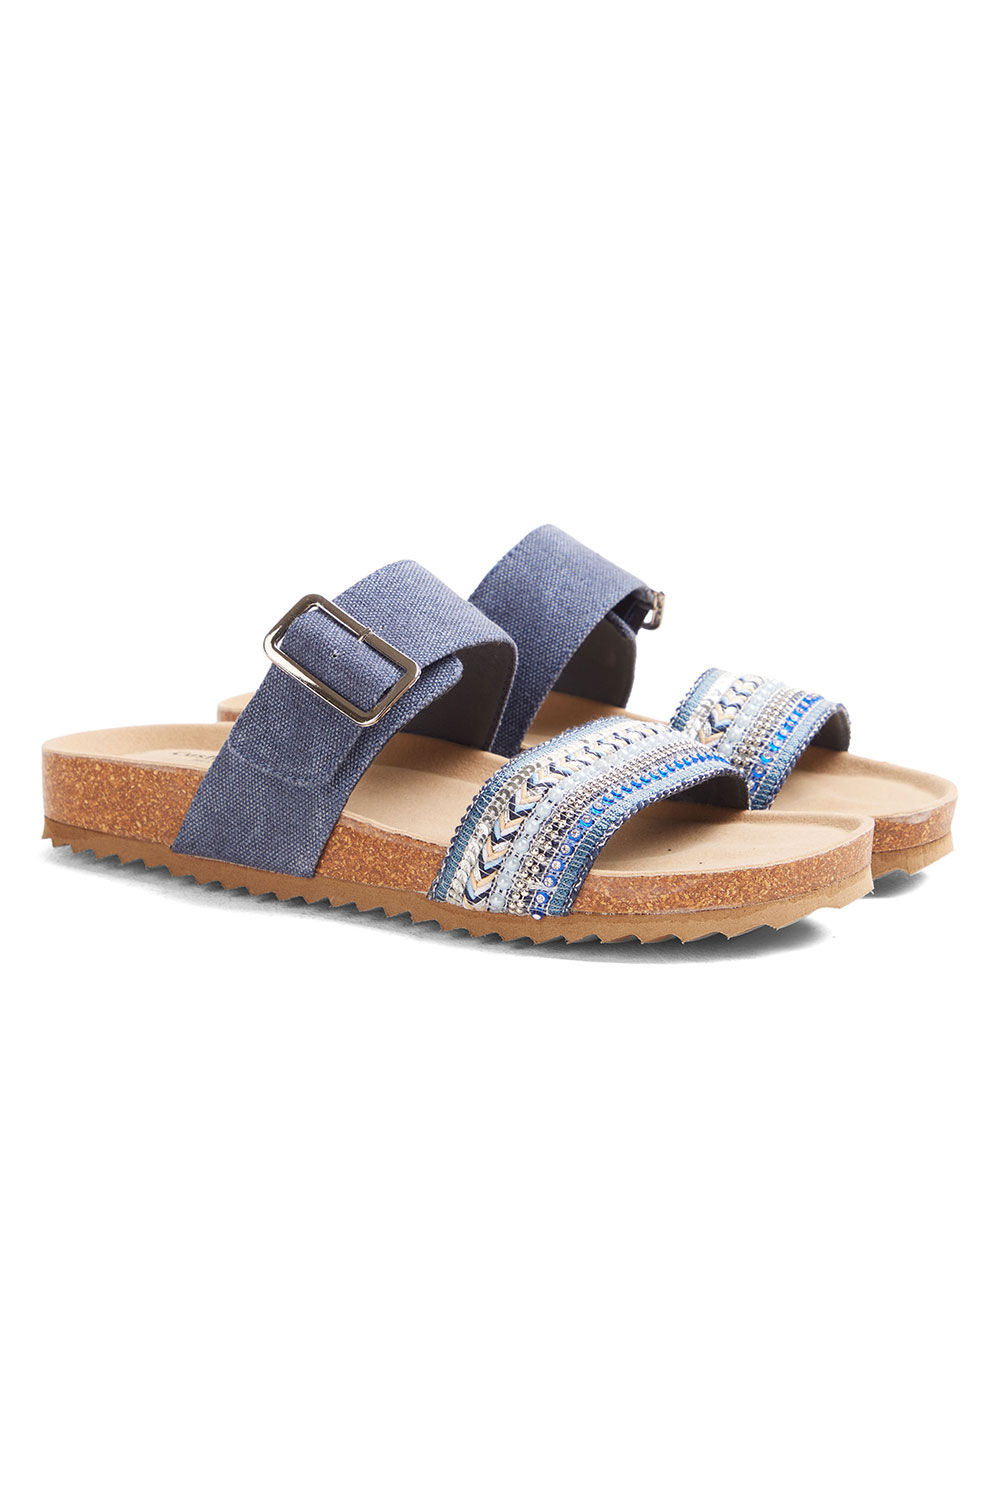 Cushion Walk Navy - Double Strap Sandal With Sequin and Buckle Detail, Size: 7